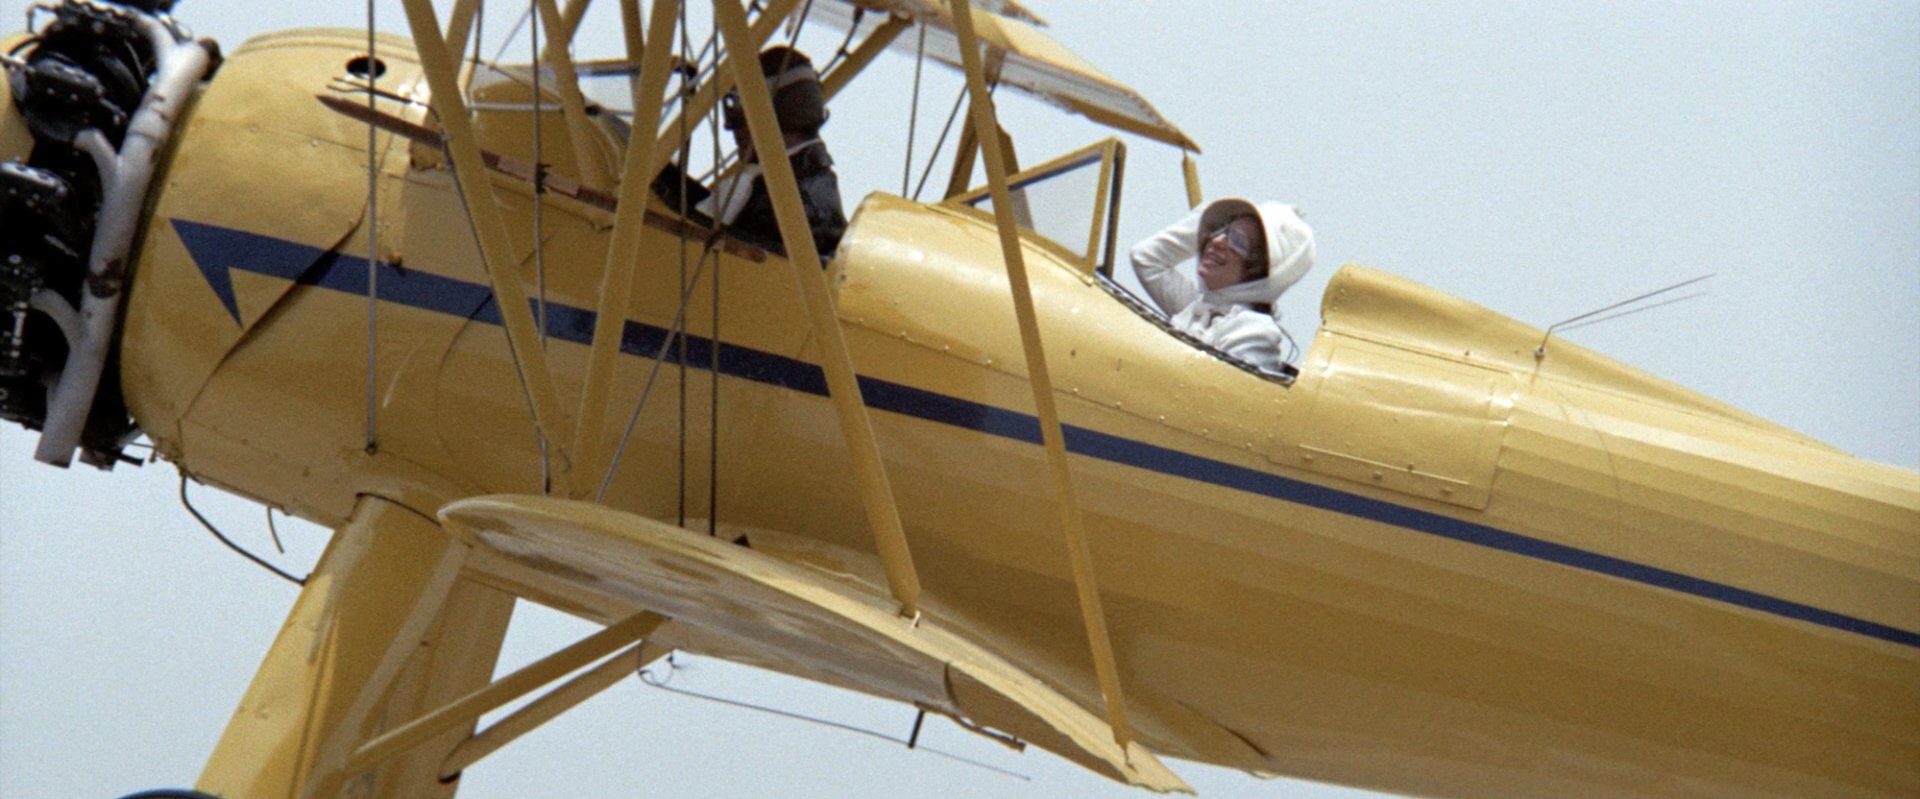 Streisand singing in the air in a yellow, open cockpit plane.